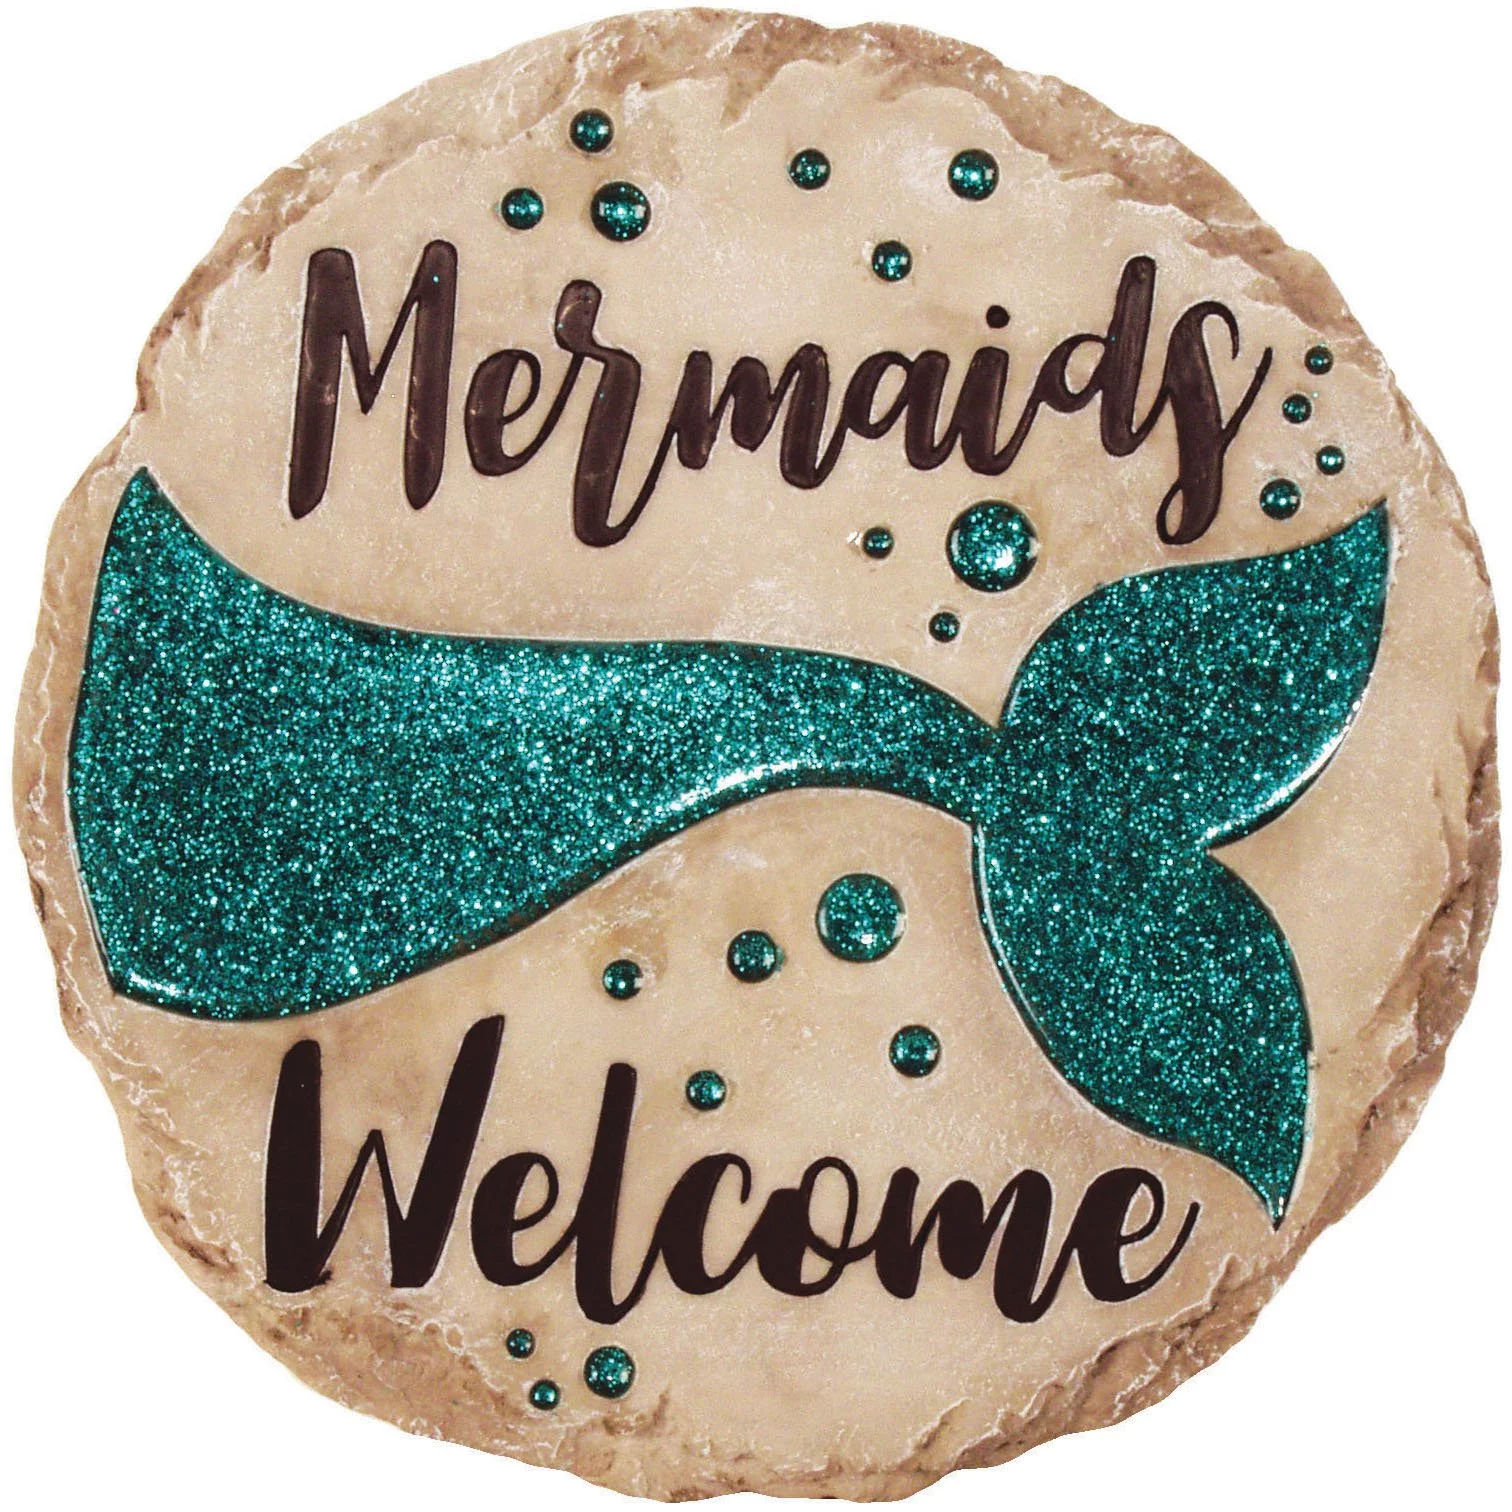 Mermaids Welcome - Mermaid Tail Stepping Stone - Mellow Monkey